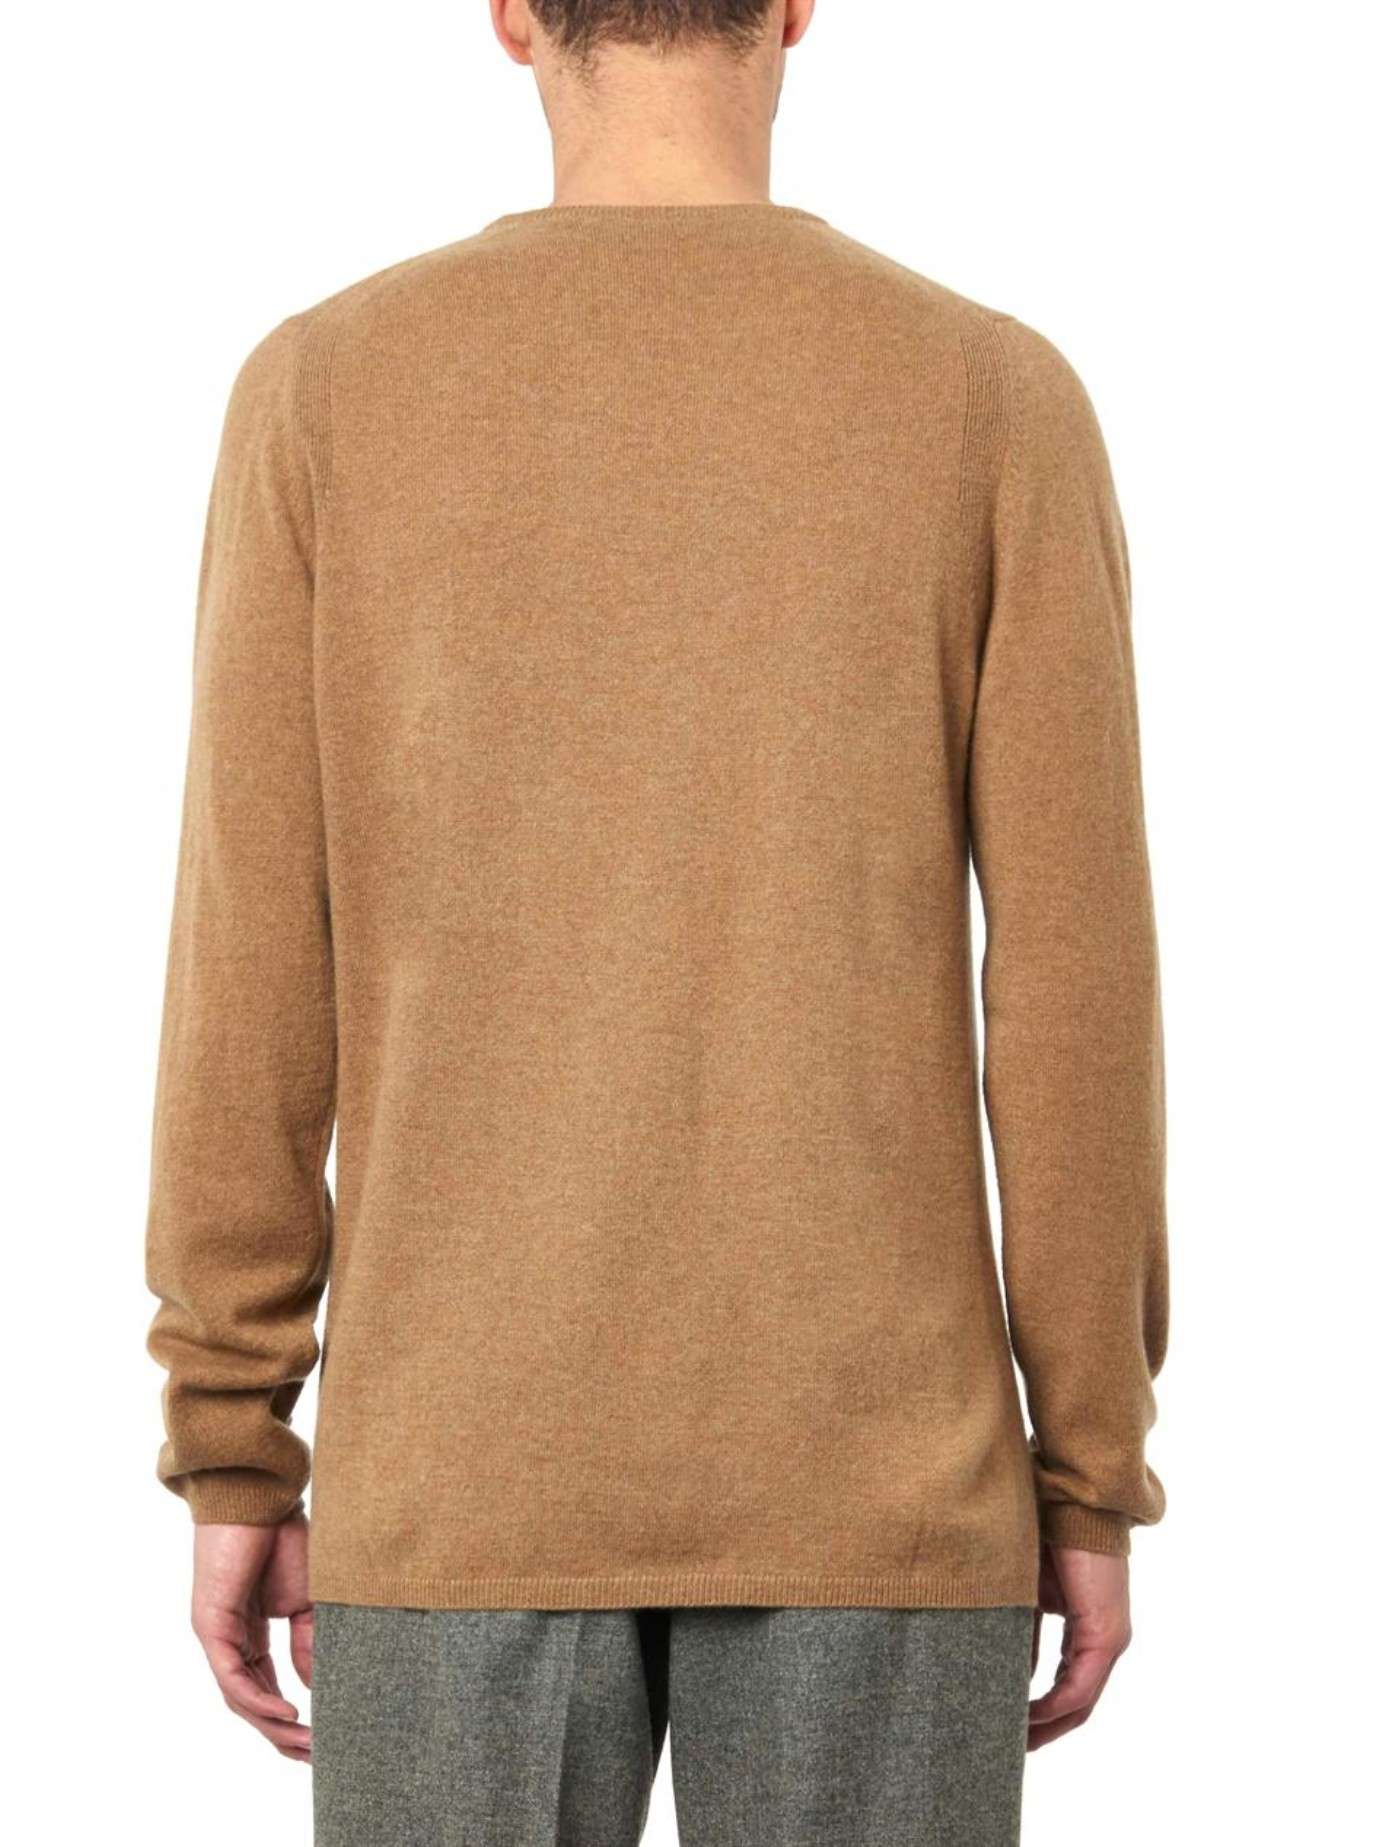 Lyst - Lemaire Crew-neck Cashmere Sweater in Brown for Men